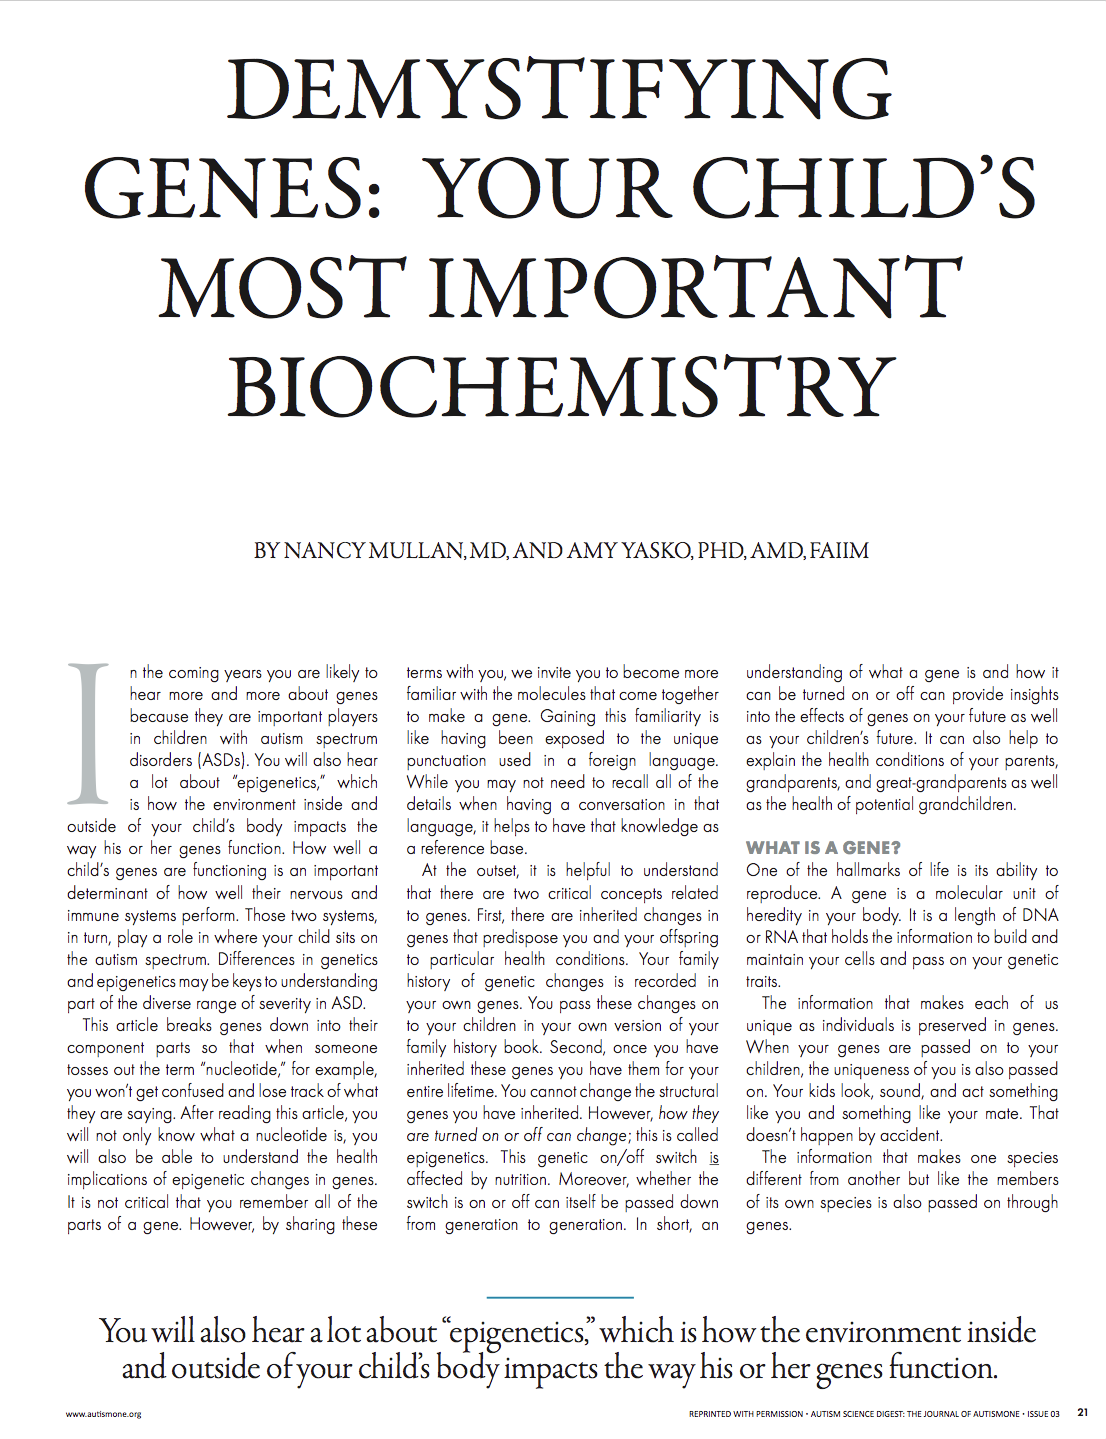 Demystifying Genes: Your Child’s Most Important Biochemistry